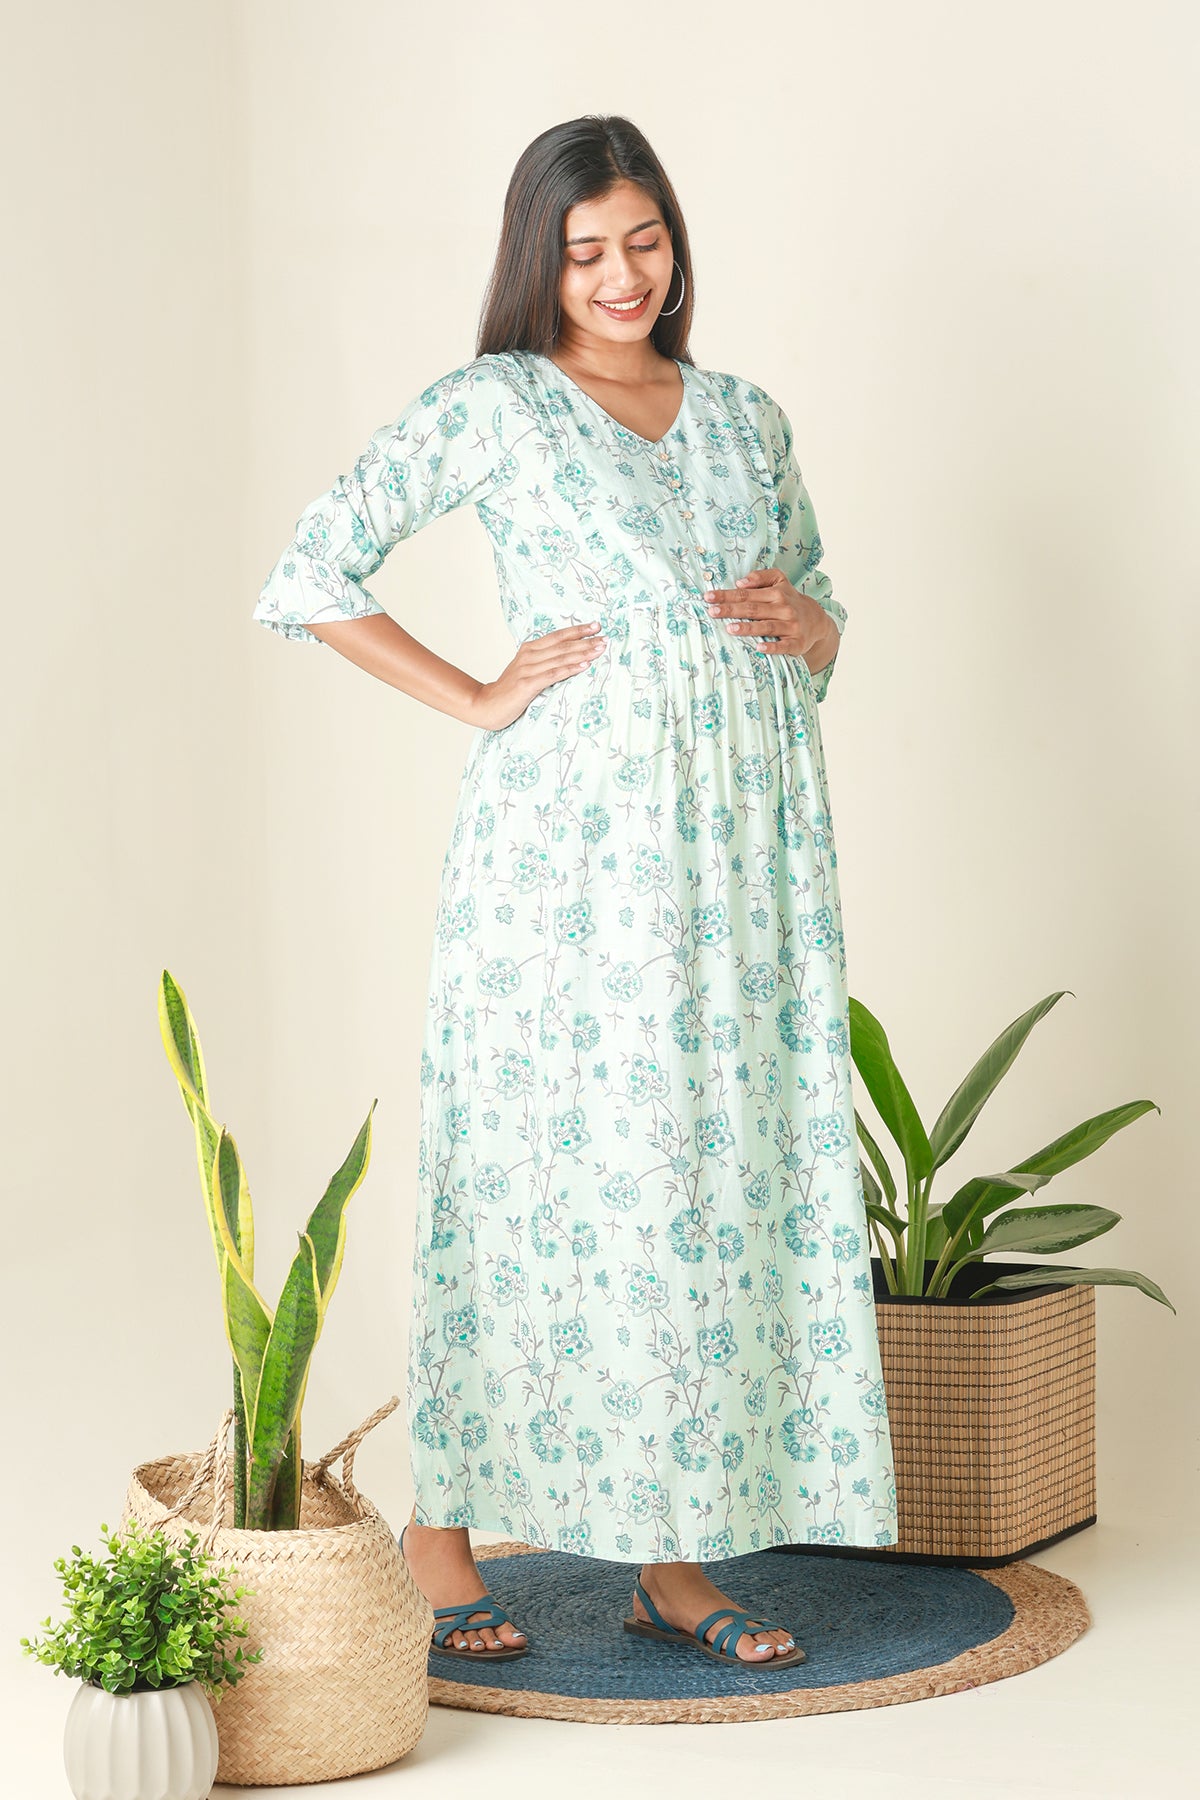 All Over Floral Printed Maternity Dress with Ruffled Yoke - Blue